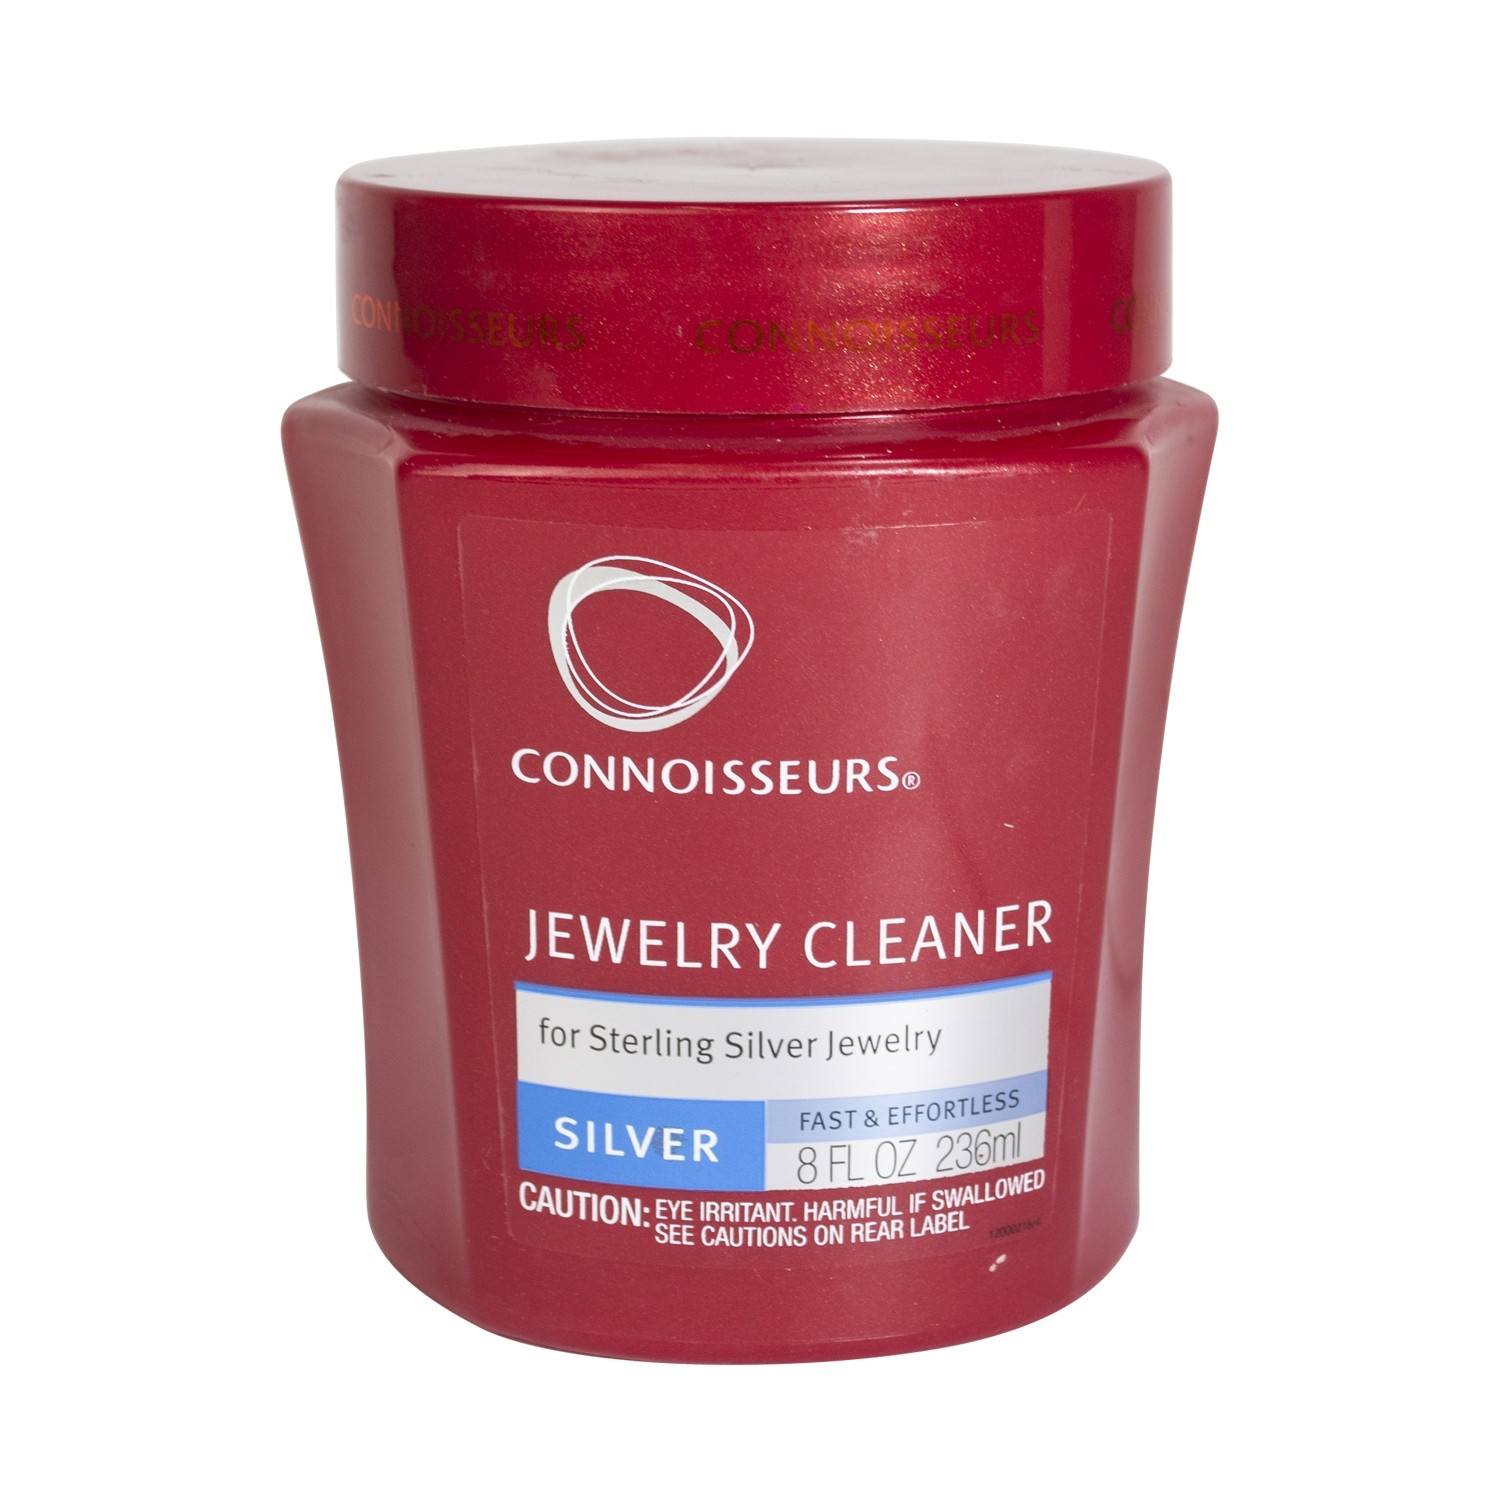 Connoisseurs Dip Jewelry Cleaner - Pearson's Jewelry